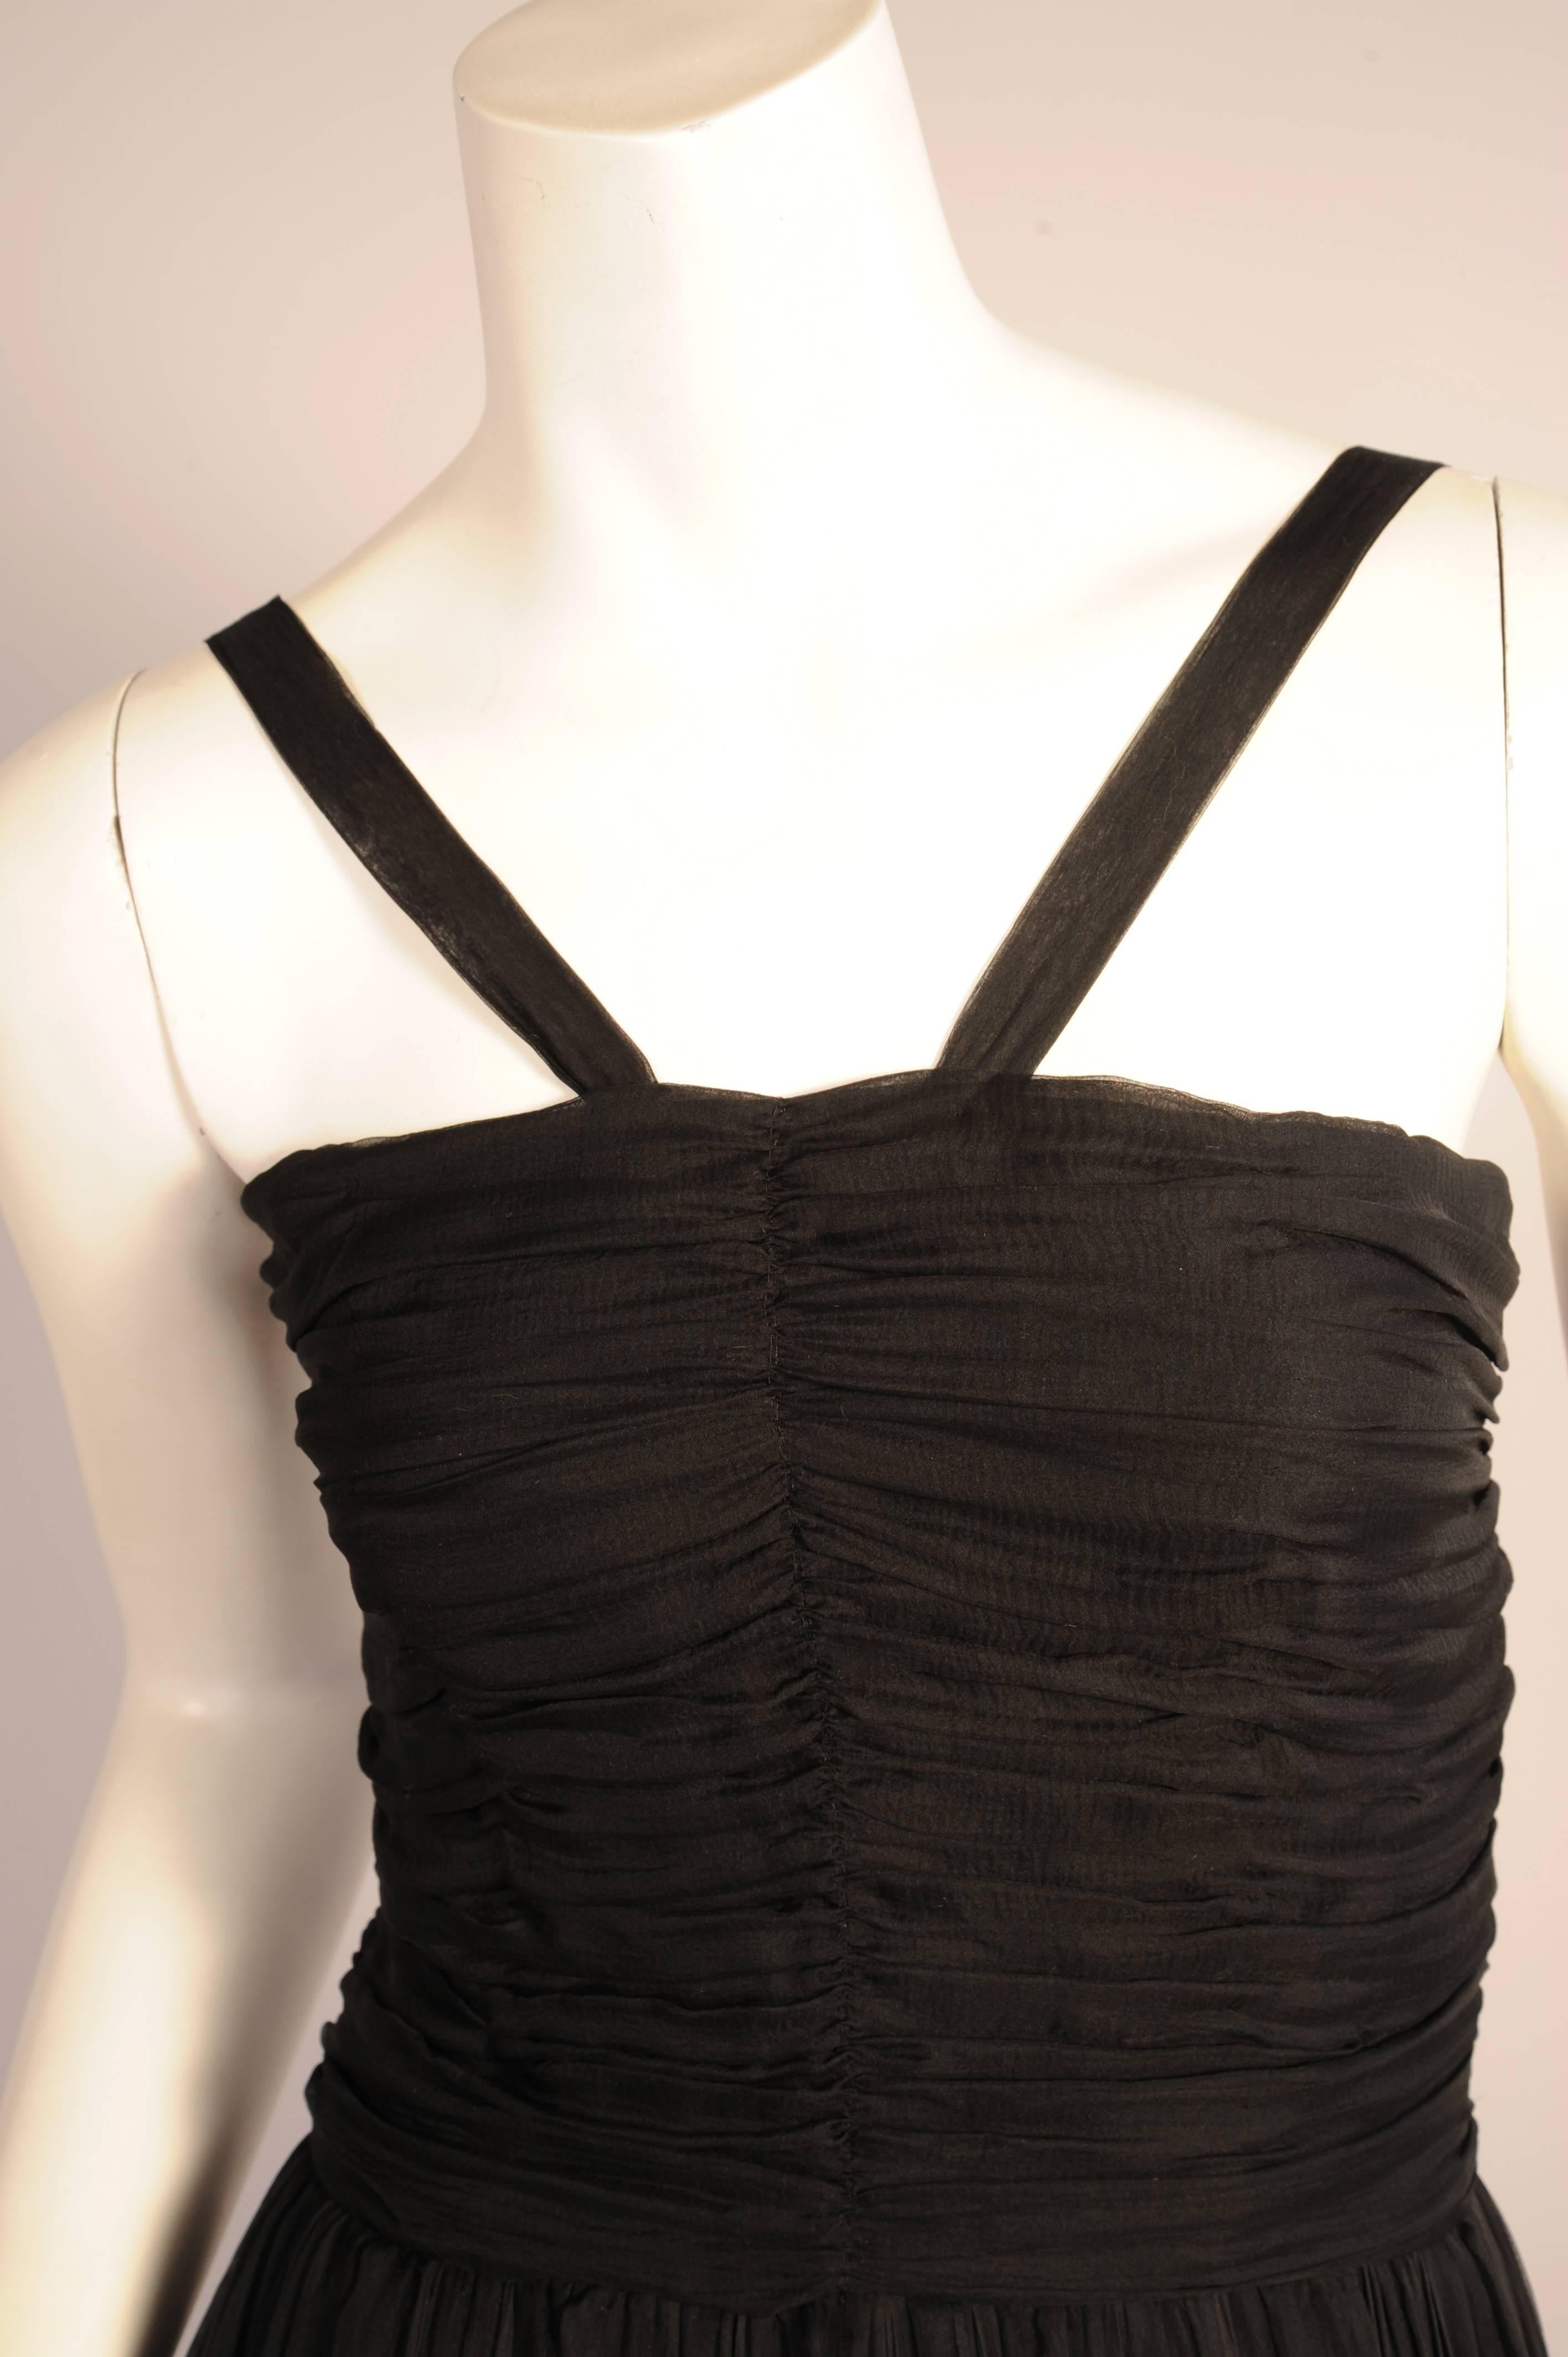 This beautiful Ben Reig black silk chiffon evening dress is reminiscent of the designs of Jean Desses. It has V shaped straps above a boned and horizontally gathered bodice. The full skirt is loosely pleated and gathered into the bodice. It falls